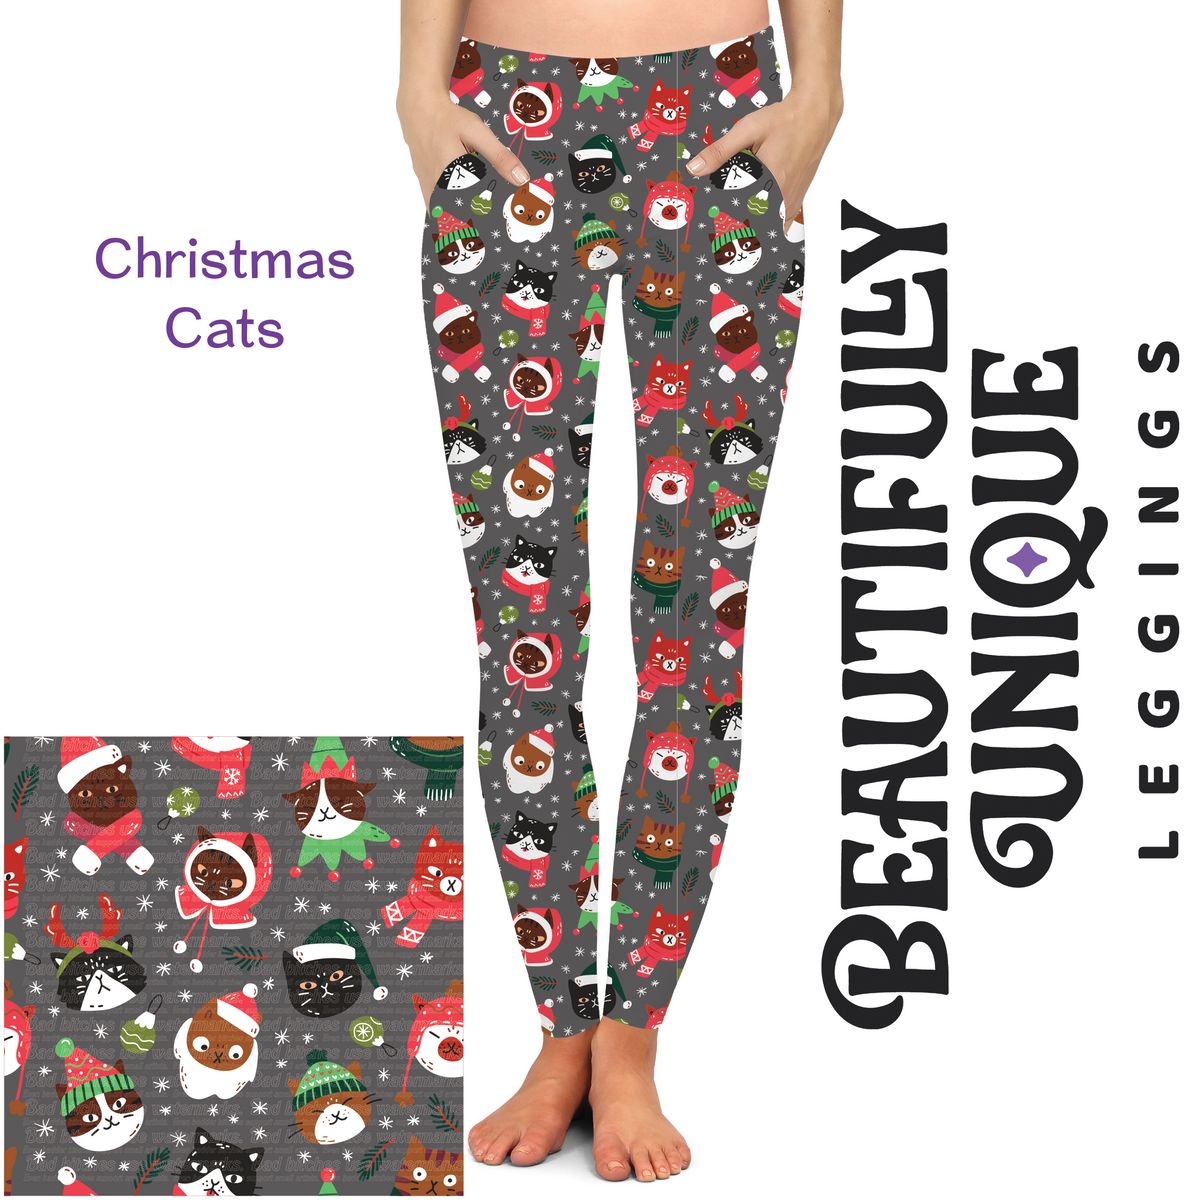 Christmas Cats (Exclusive) - Pocket Leggings – Beautifully Unique